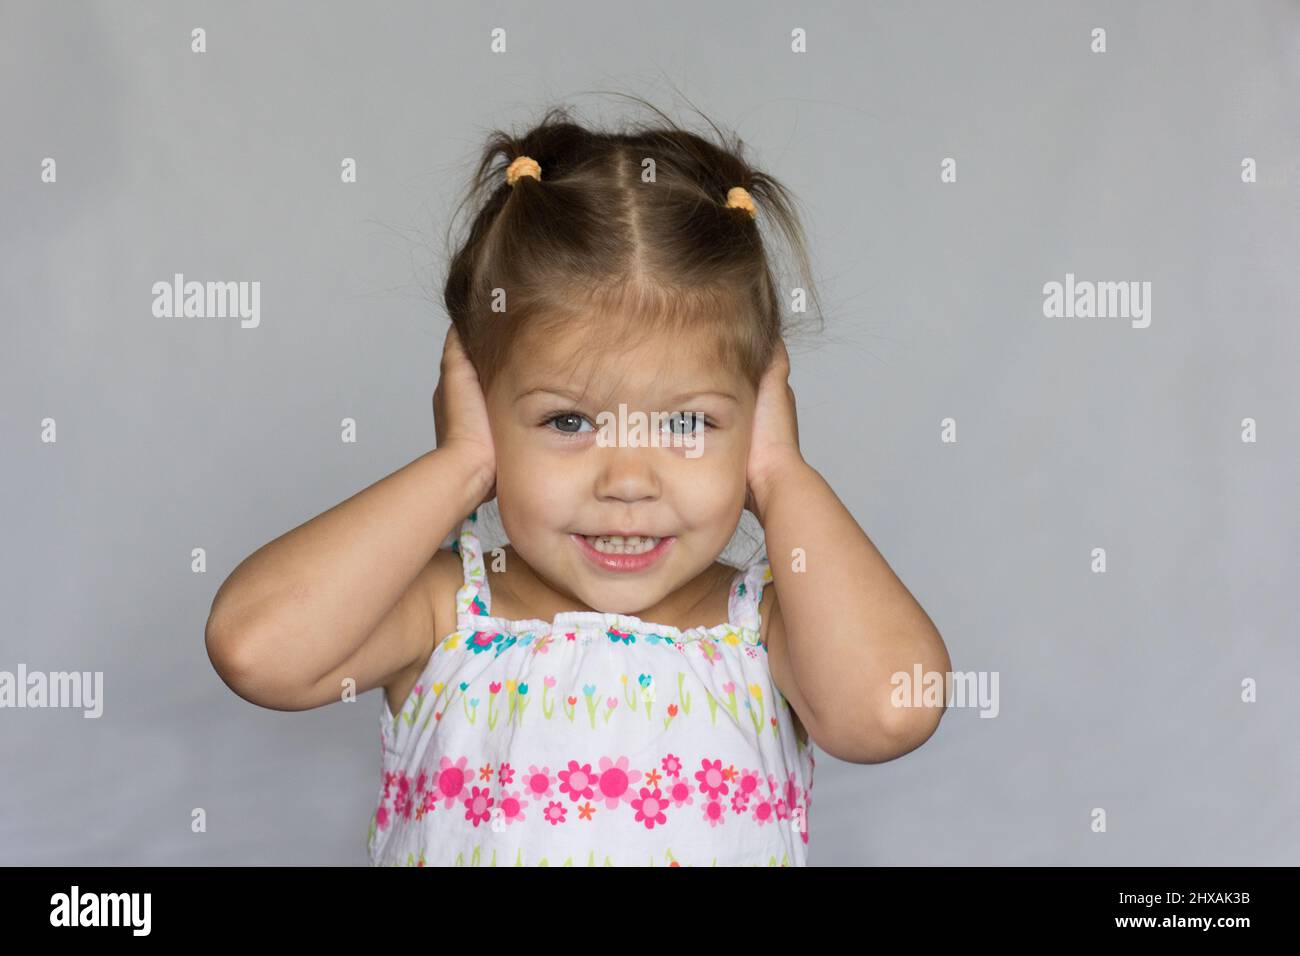 Smiling child does not want to hear anything closing ears by hands Stock Photo